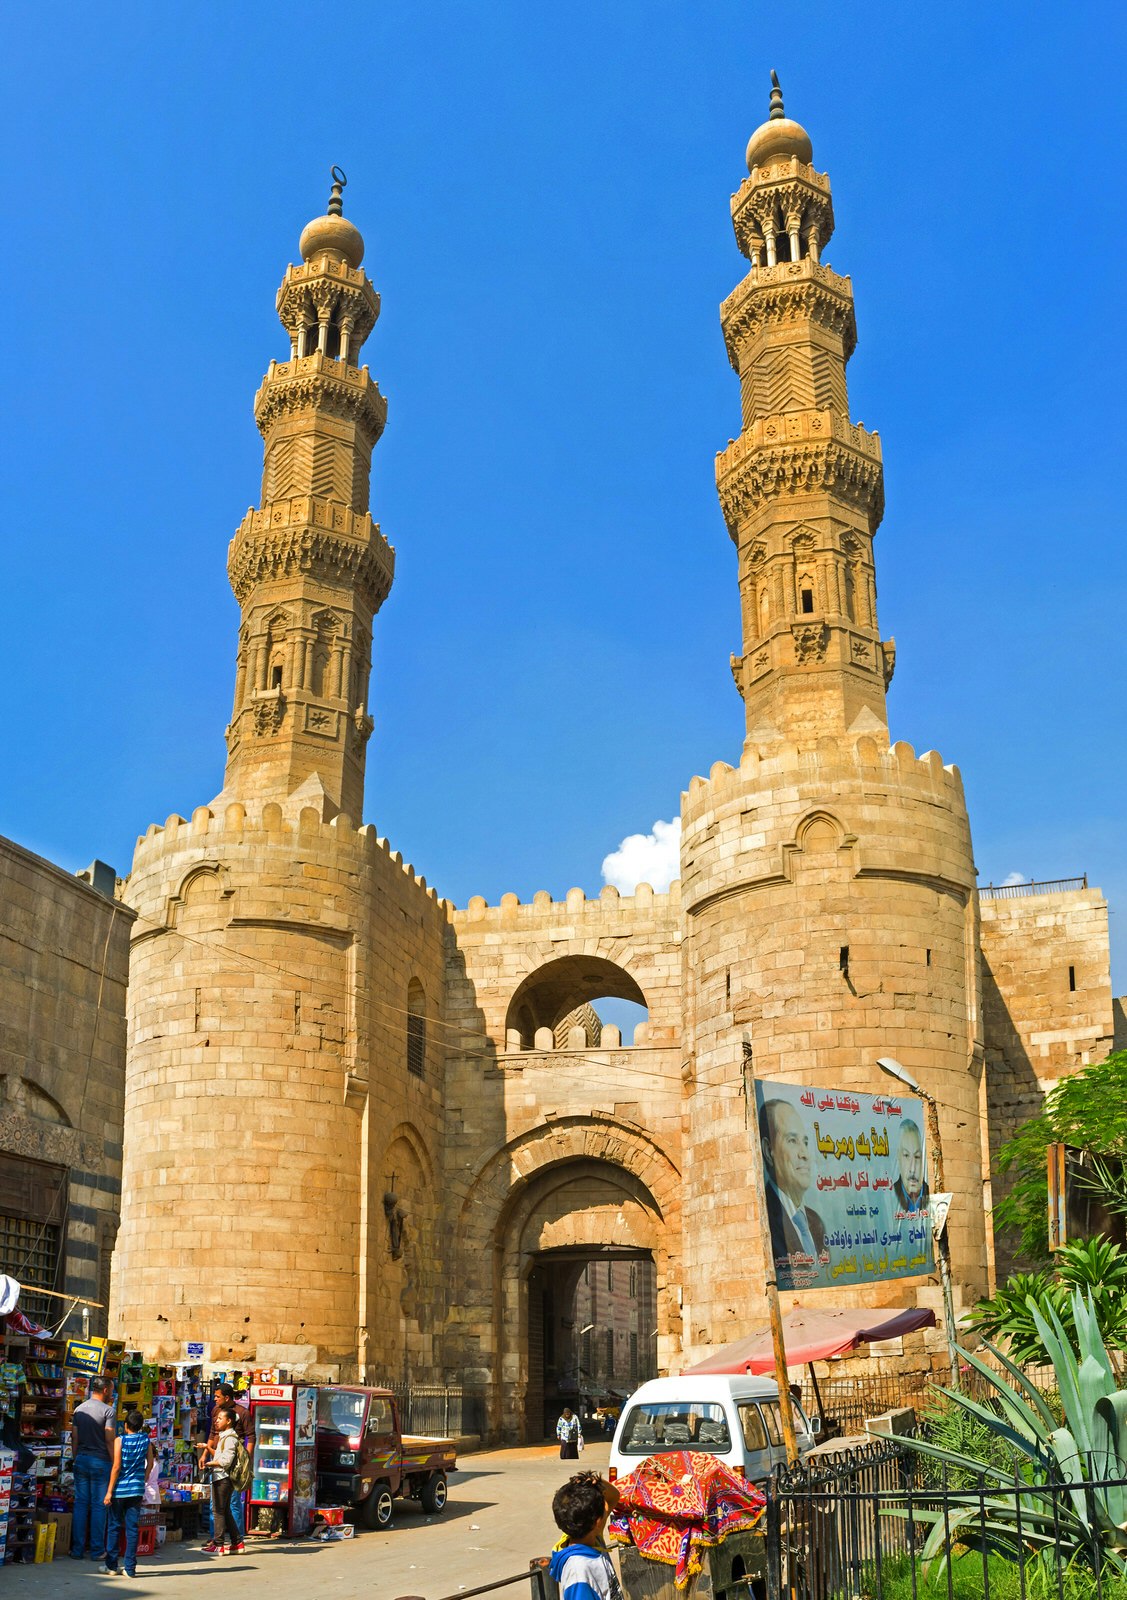 The medieval Gates of Bab Zuweila located in heart of Islamic Cairo and surrounded by noisy Arabic souq. Image by eFesenko / Shutterstock